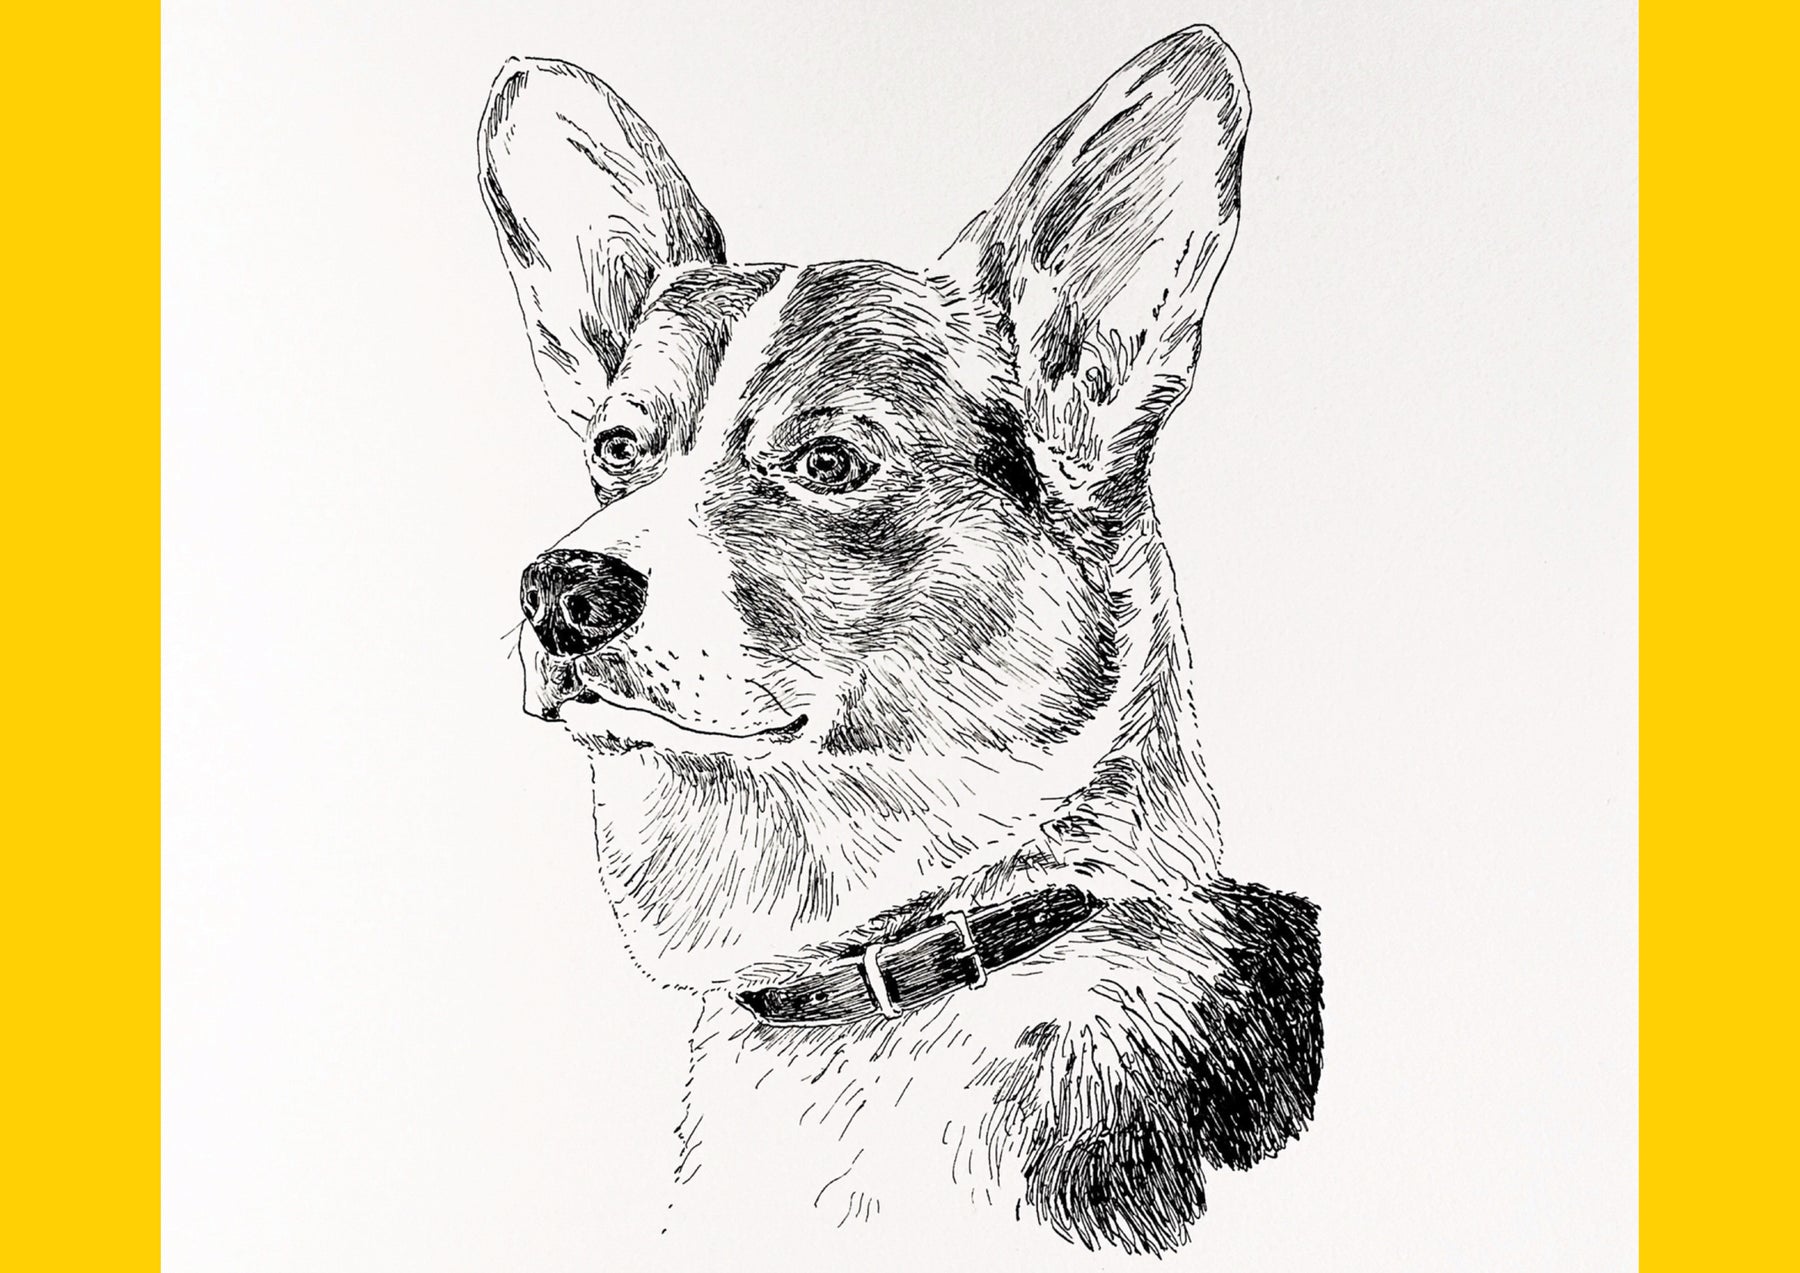 Morus Monthly: Drawing Dogs with Tom Bingham